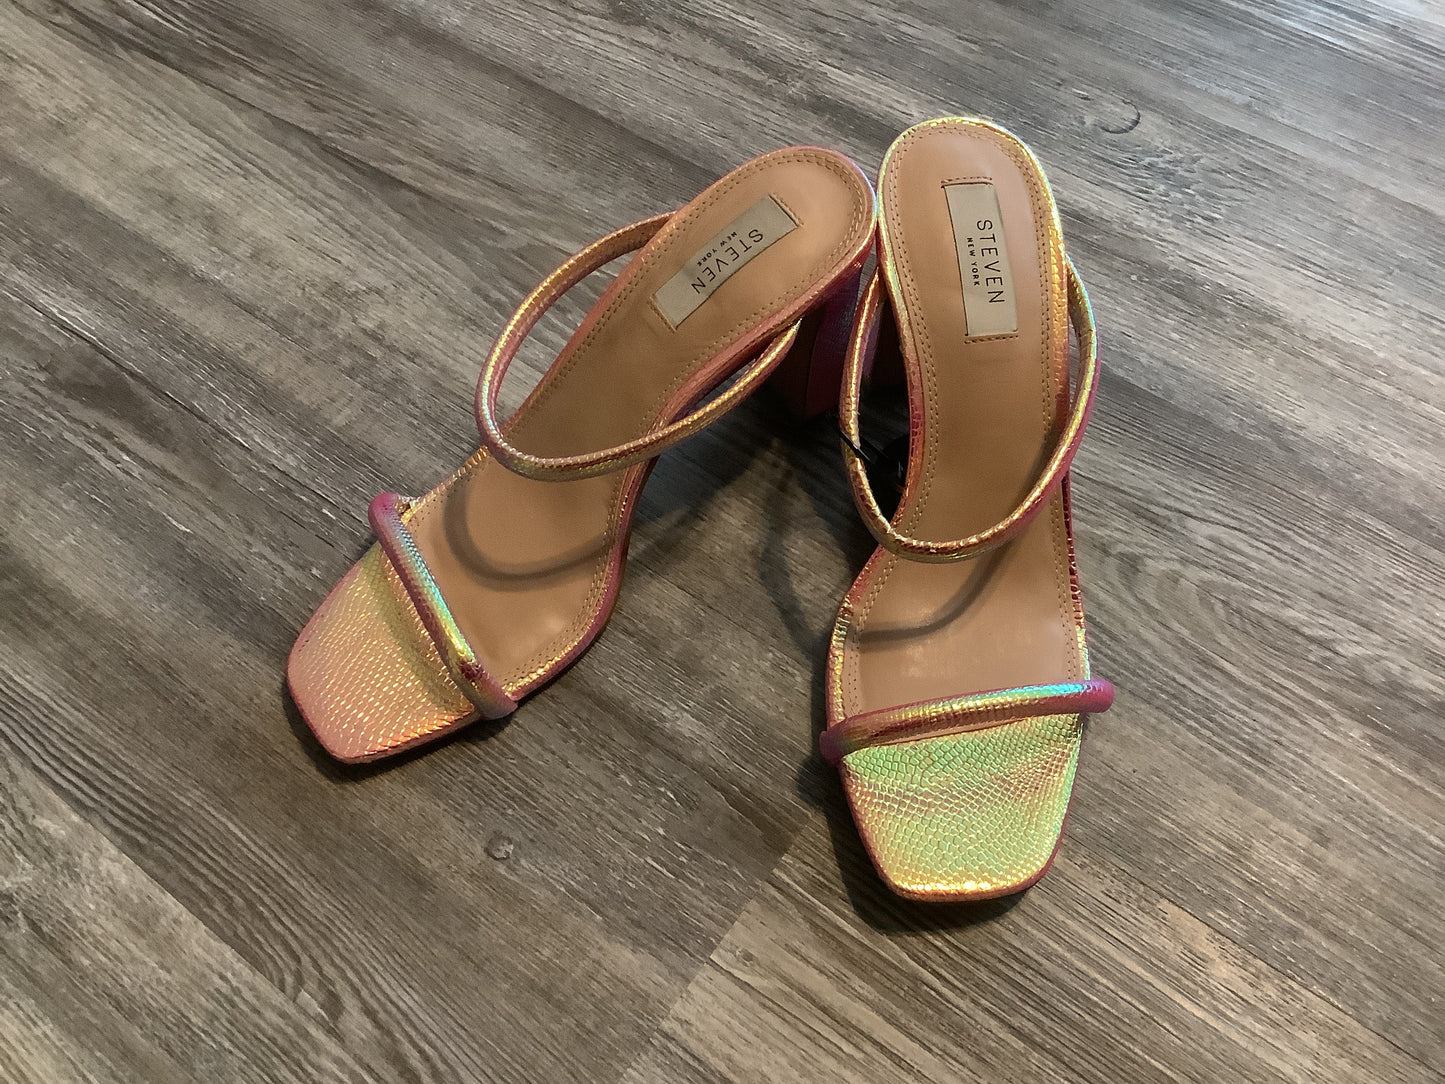 Multi-colored Shoes Heels Block Clothes Mentor, Size 8.5